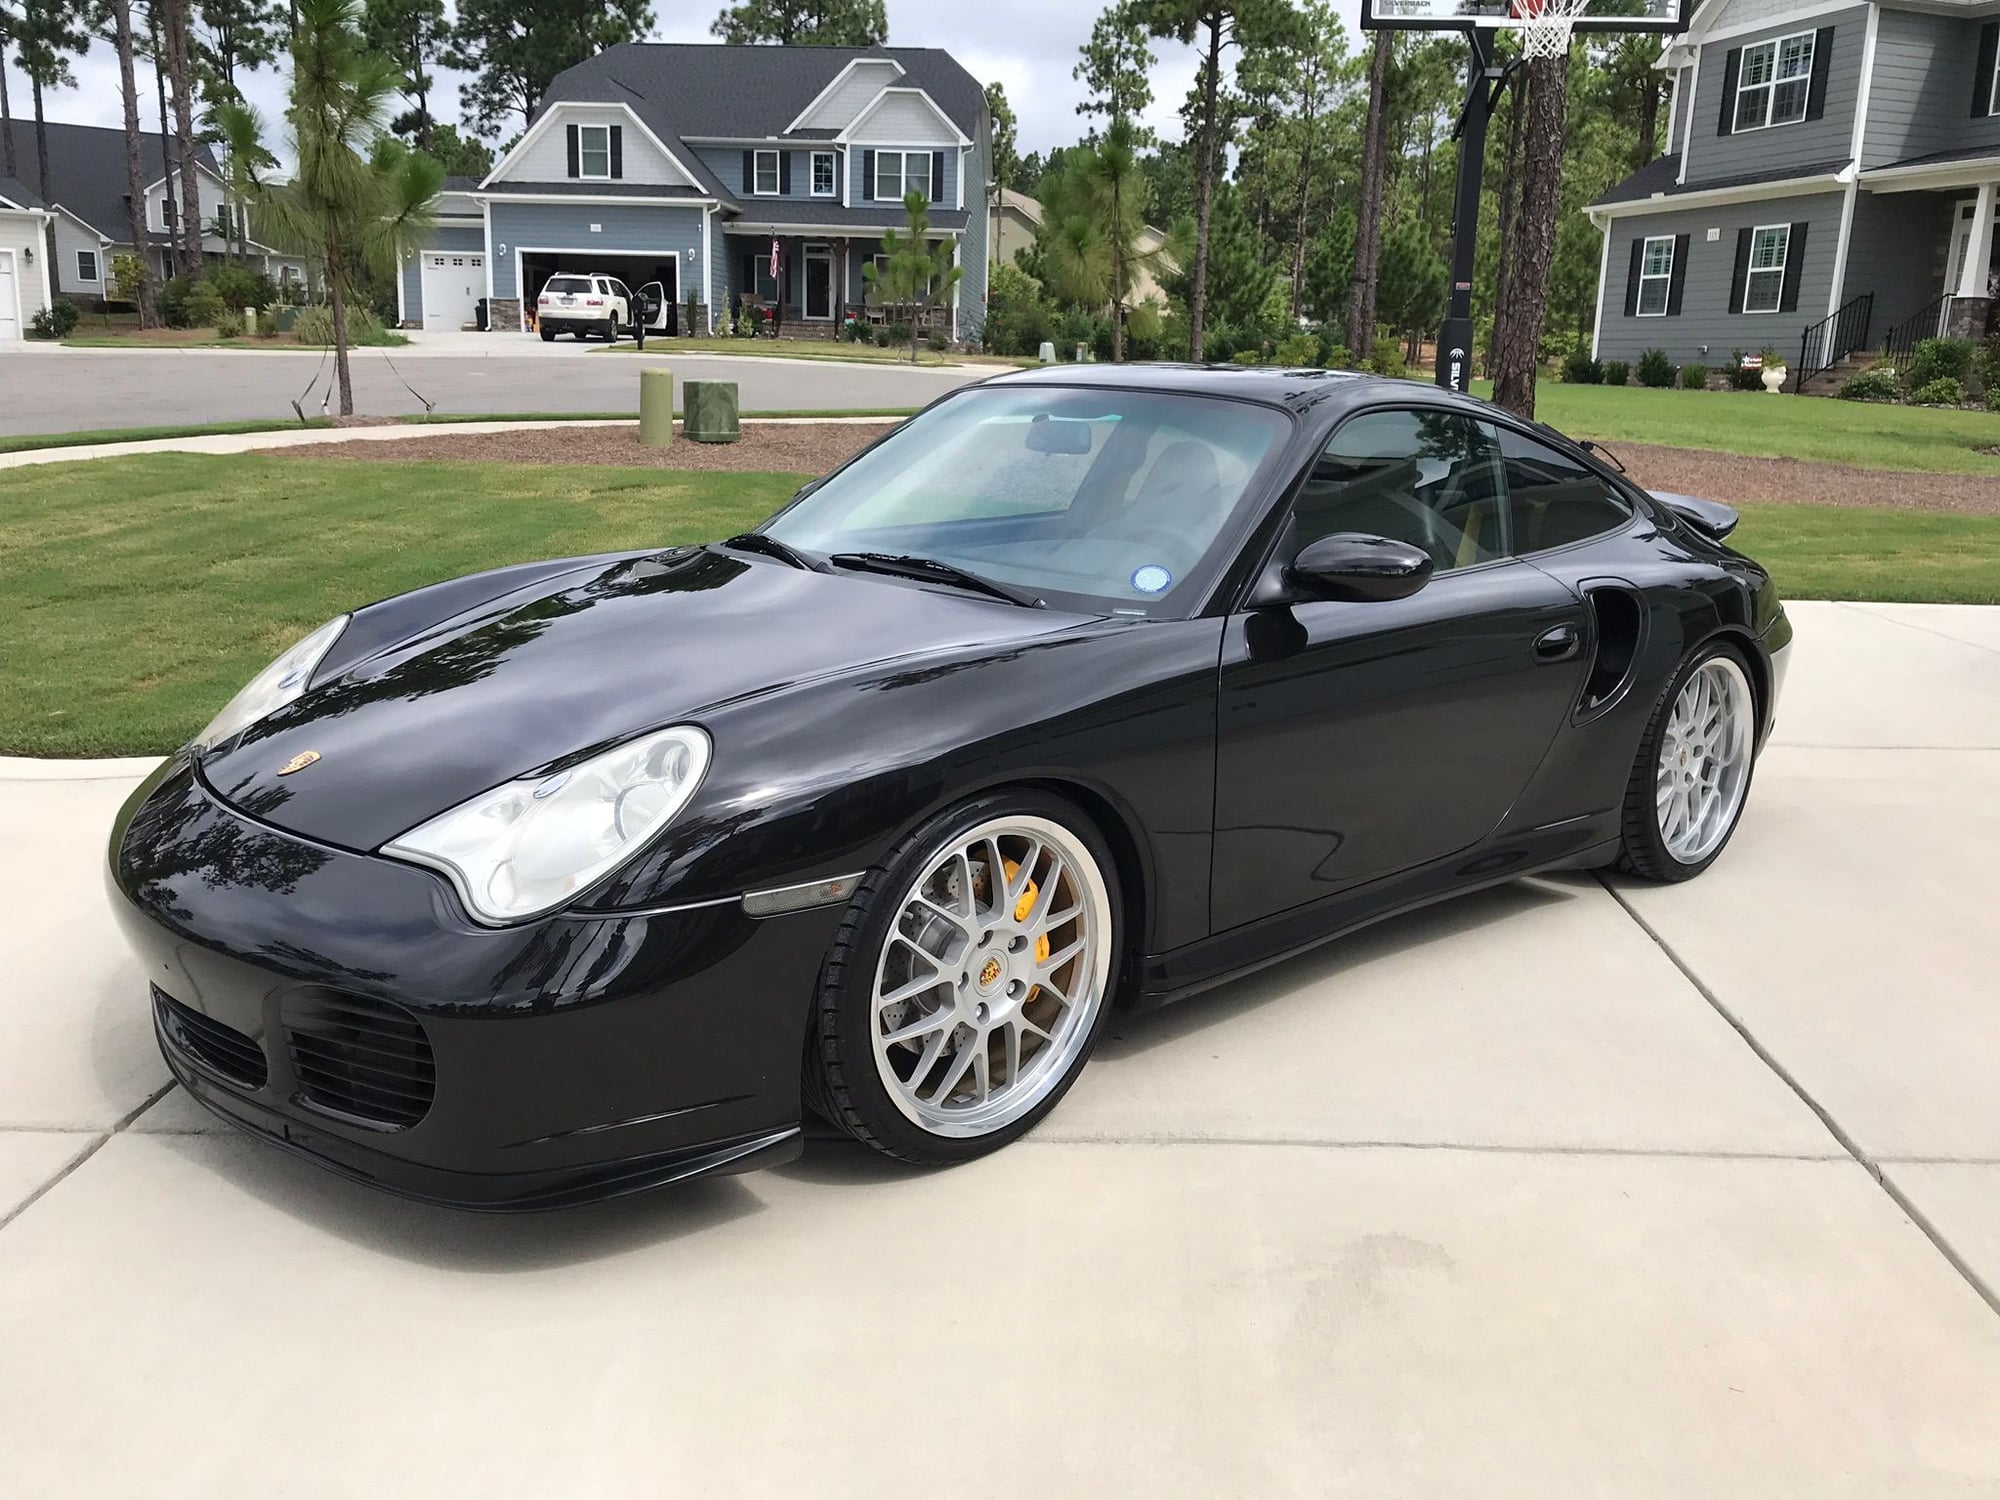 2001 Porsche 911 - 2001 911 Turbo with yellow calipers and belts - Used - VIN WP0AB299X1S686162 - 69,240 Miles - 6 cyl - AWD - Manual - Coupe - Black - Southern Pines, NC 28387, United States